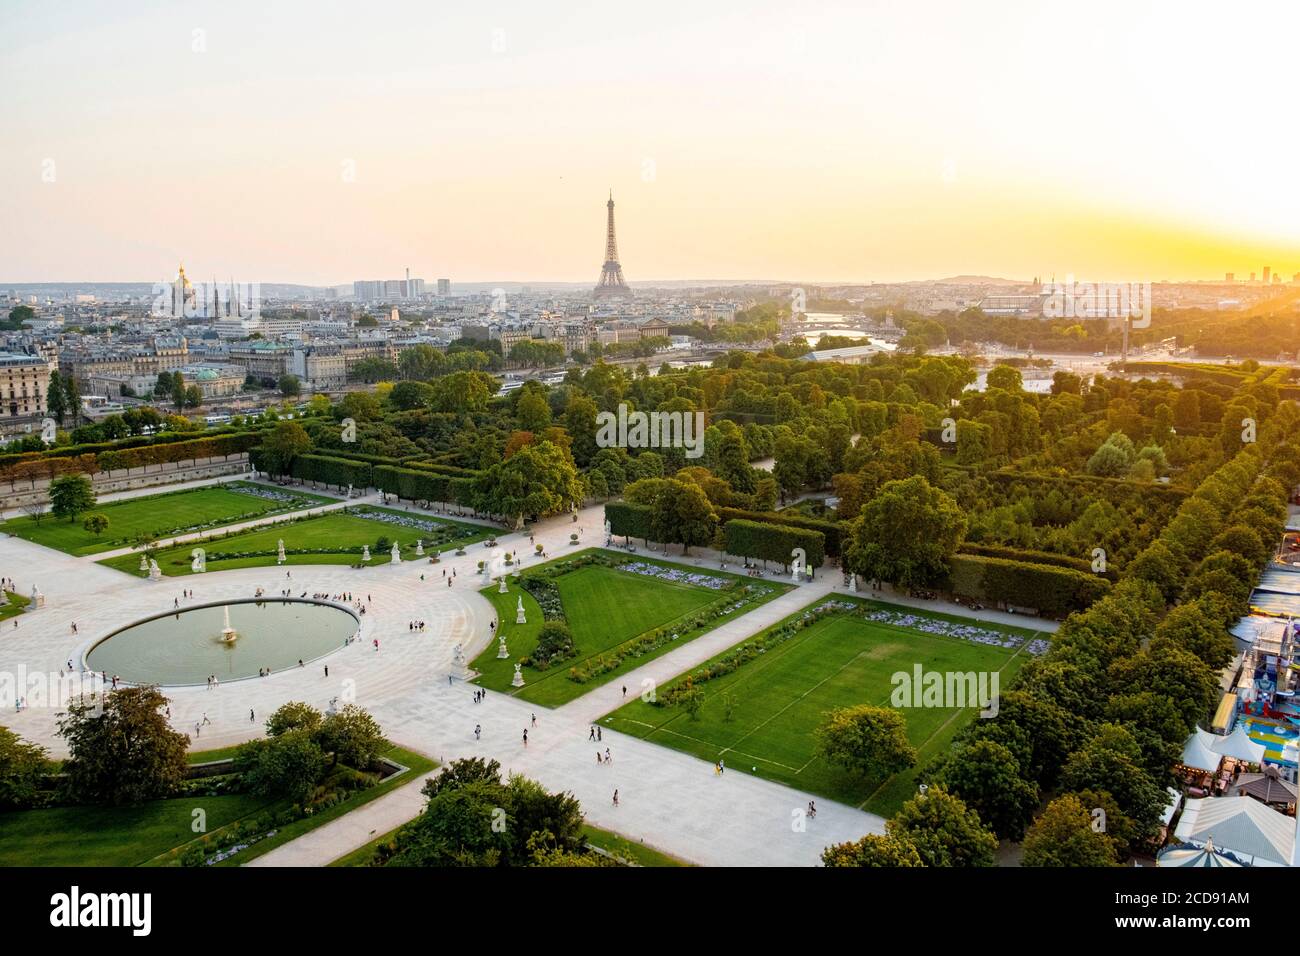 France, Paris, the Tuileries garden the Eiffel Tower (aerial view) Stock Photo